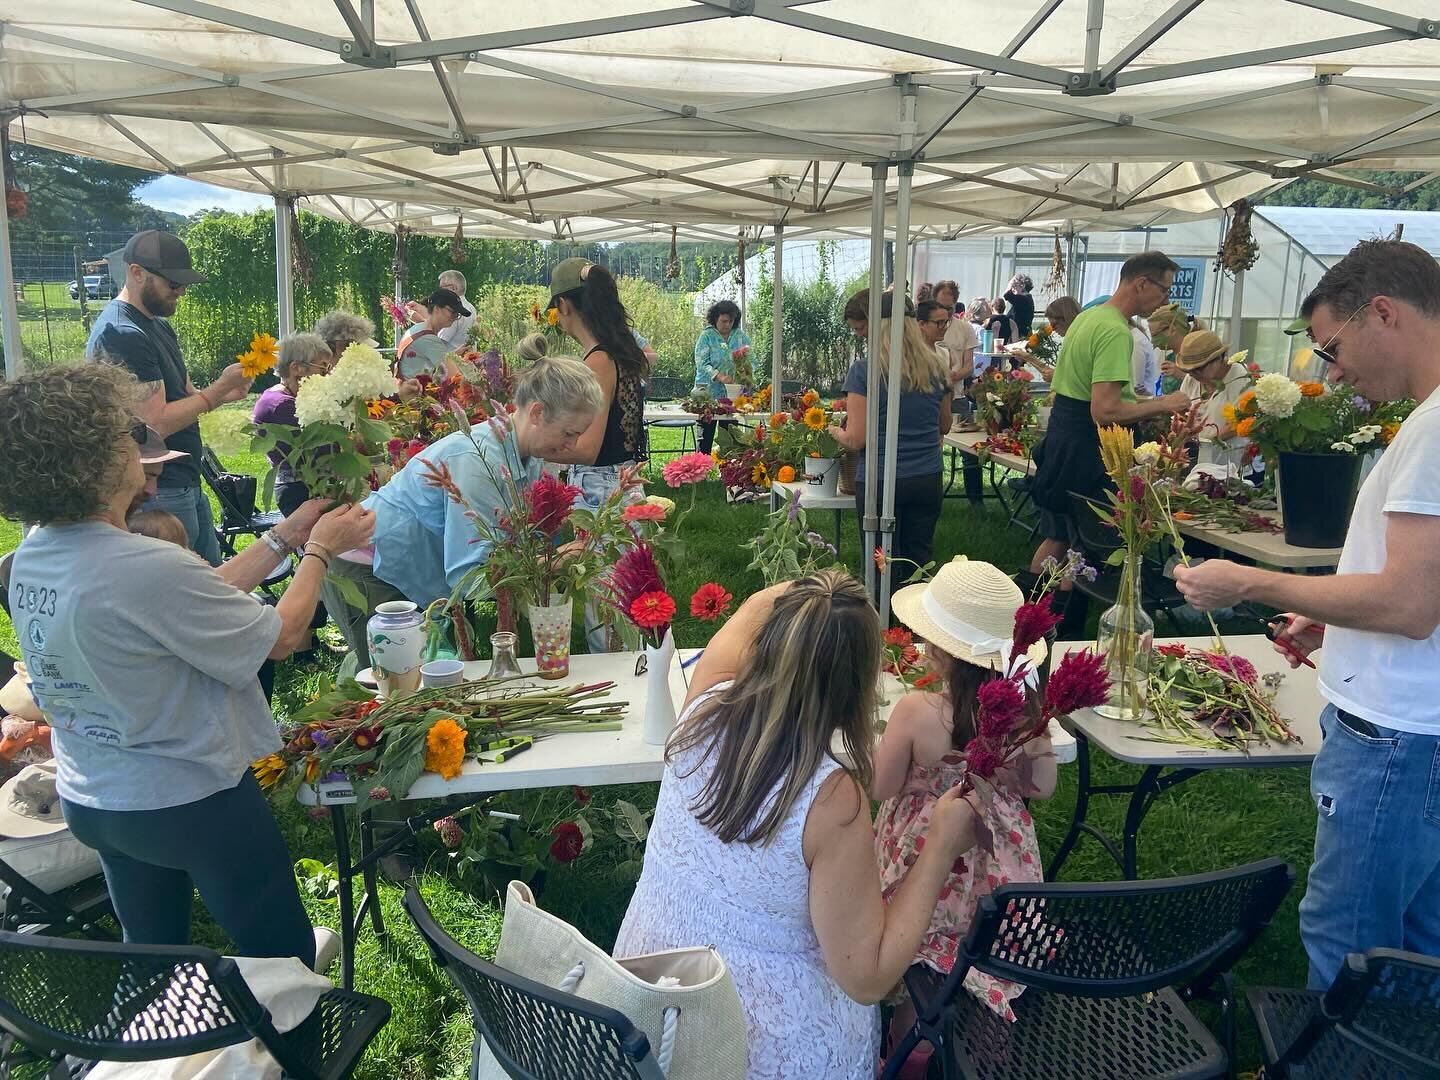 So excited to be hosting 2 flower workshops this summer at the farm. Flower field tour, cut your own stems, and design arrangements with instruction from our team. Don't miss this horticultural experience!
🌺💐#flowerfarmers #horticulture #organicflo